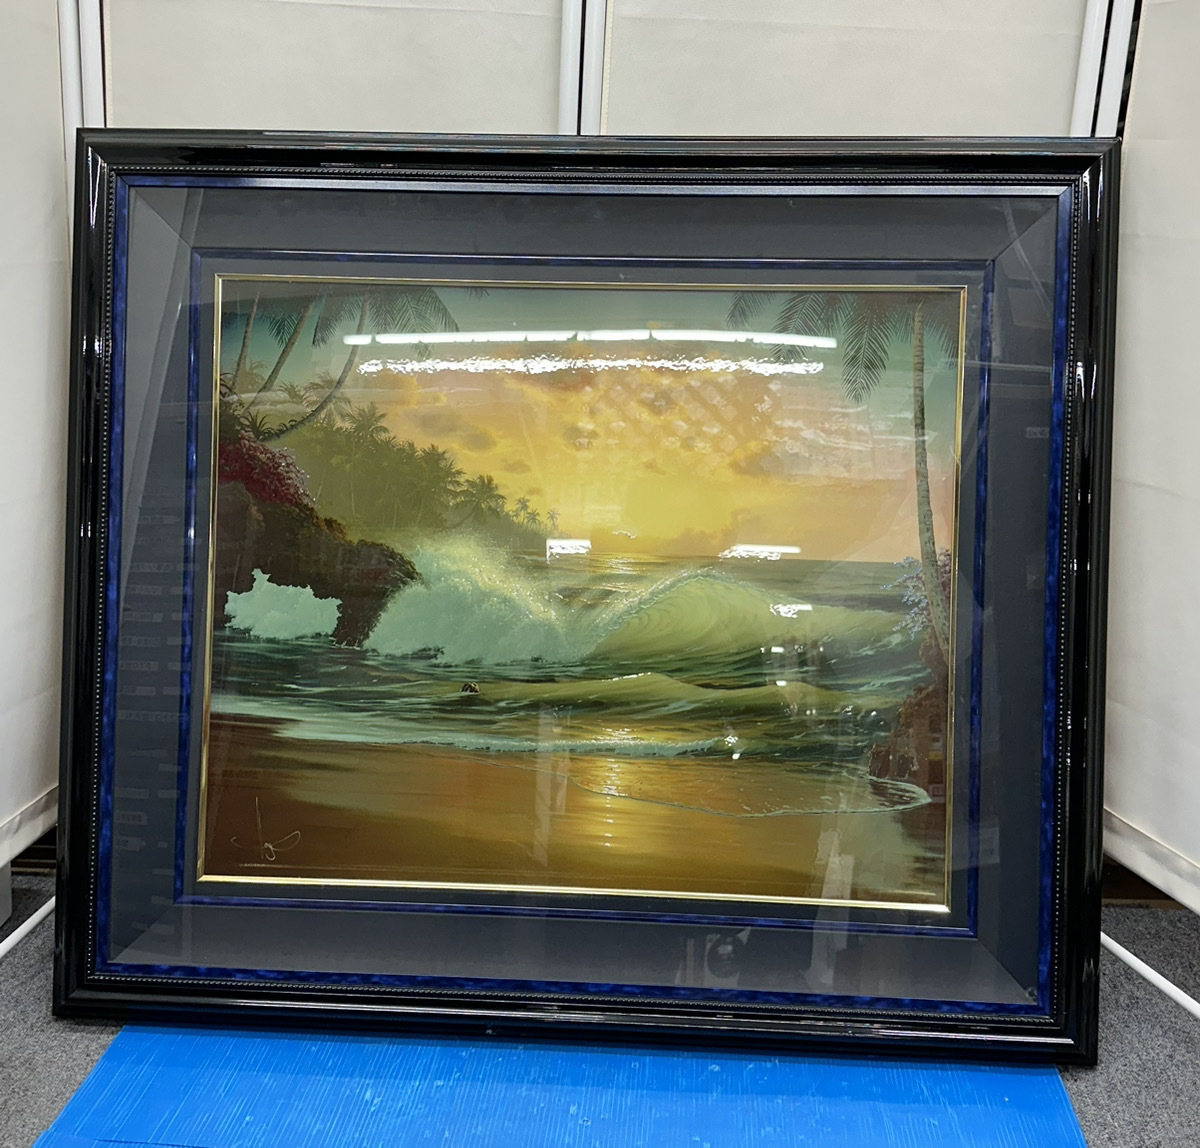 * oil painting woodcut John al hogue John aru horn g time less Ocean nature scenery sea . burning . day autographed written guarantee none present condition delivery storage goods *